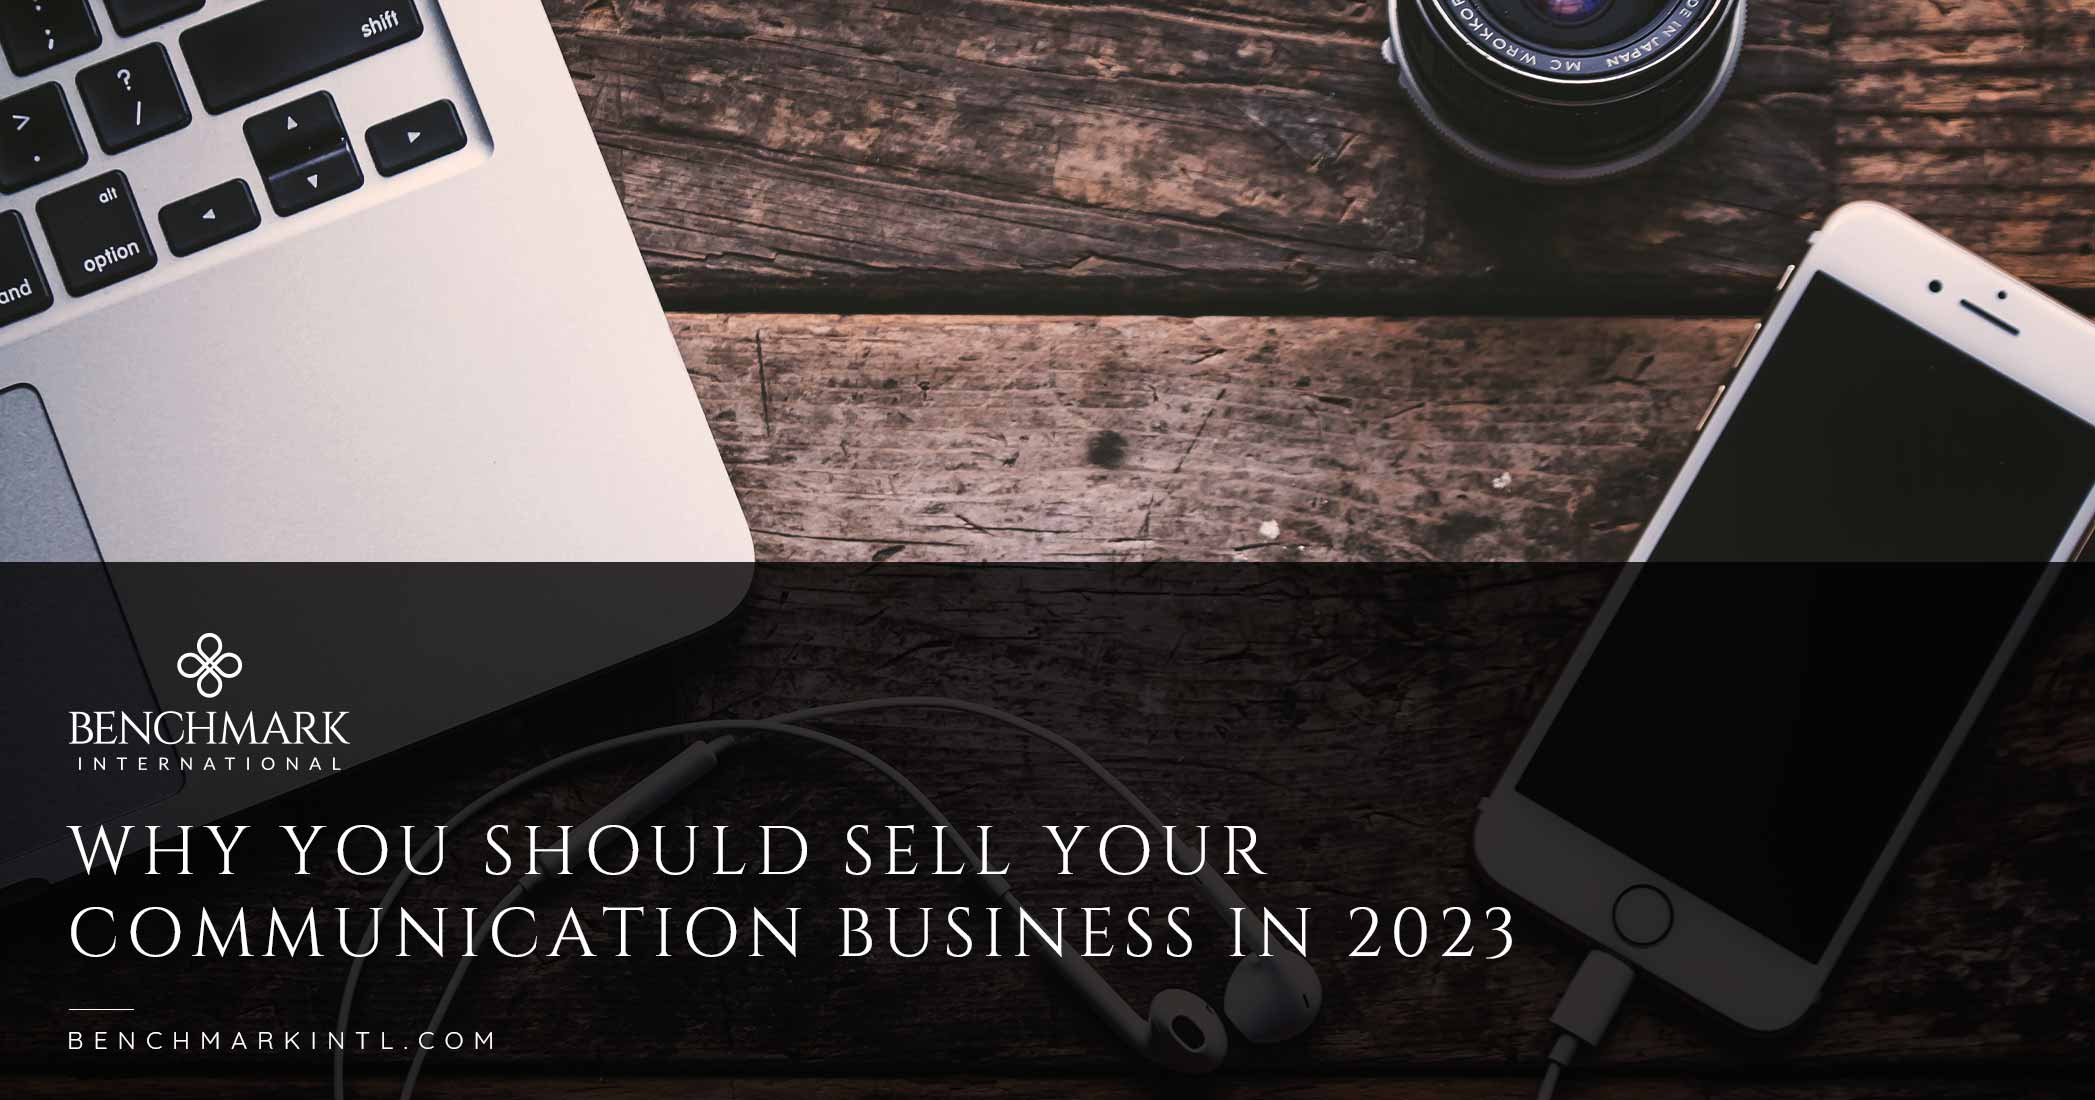 Why You Should Sell Your Communication Business In 2023